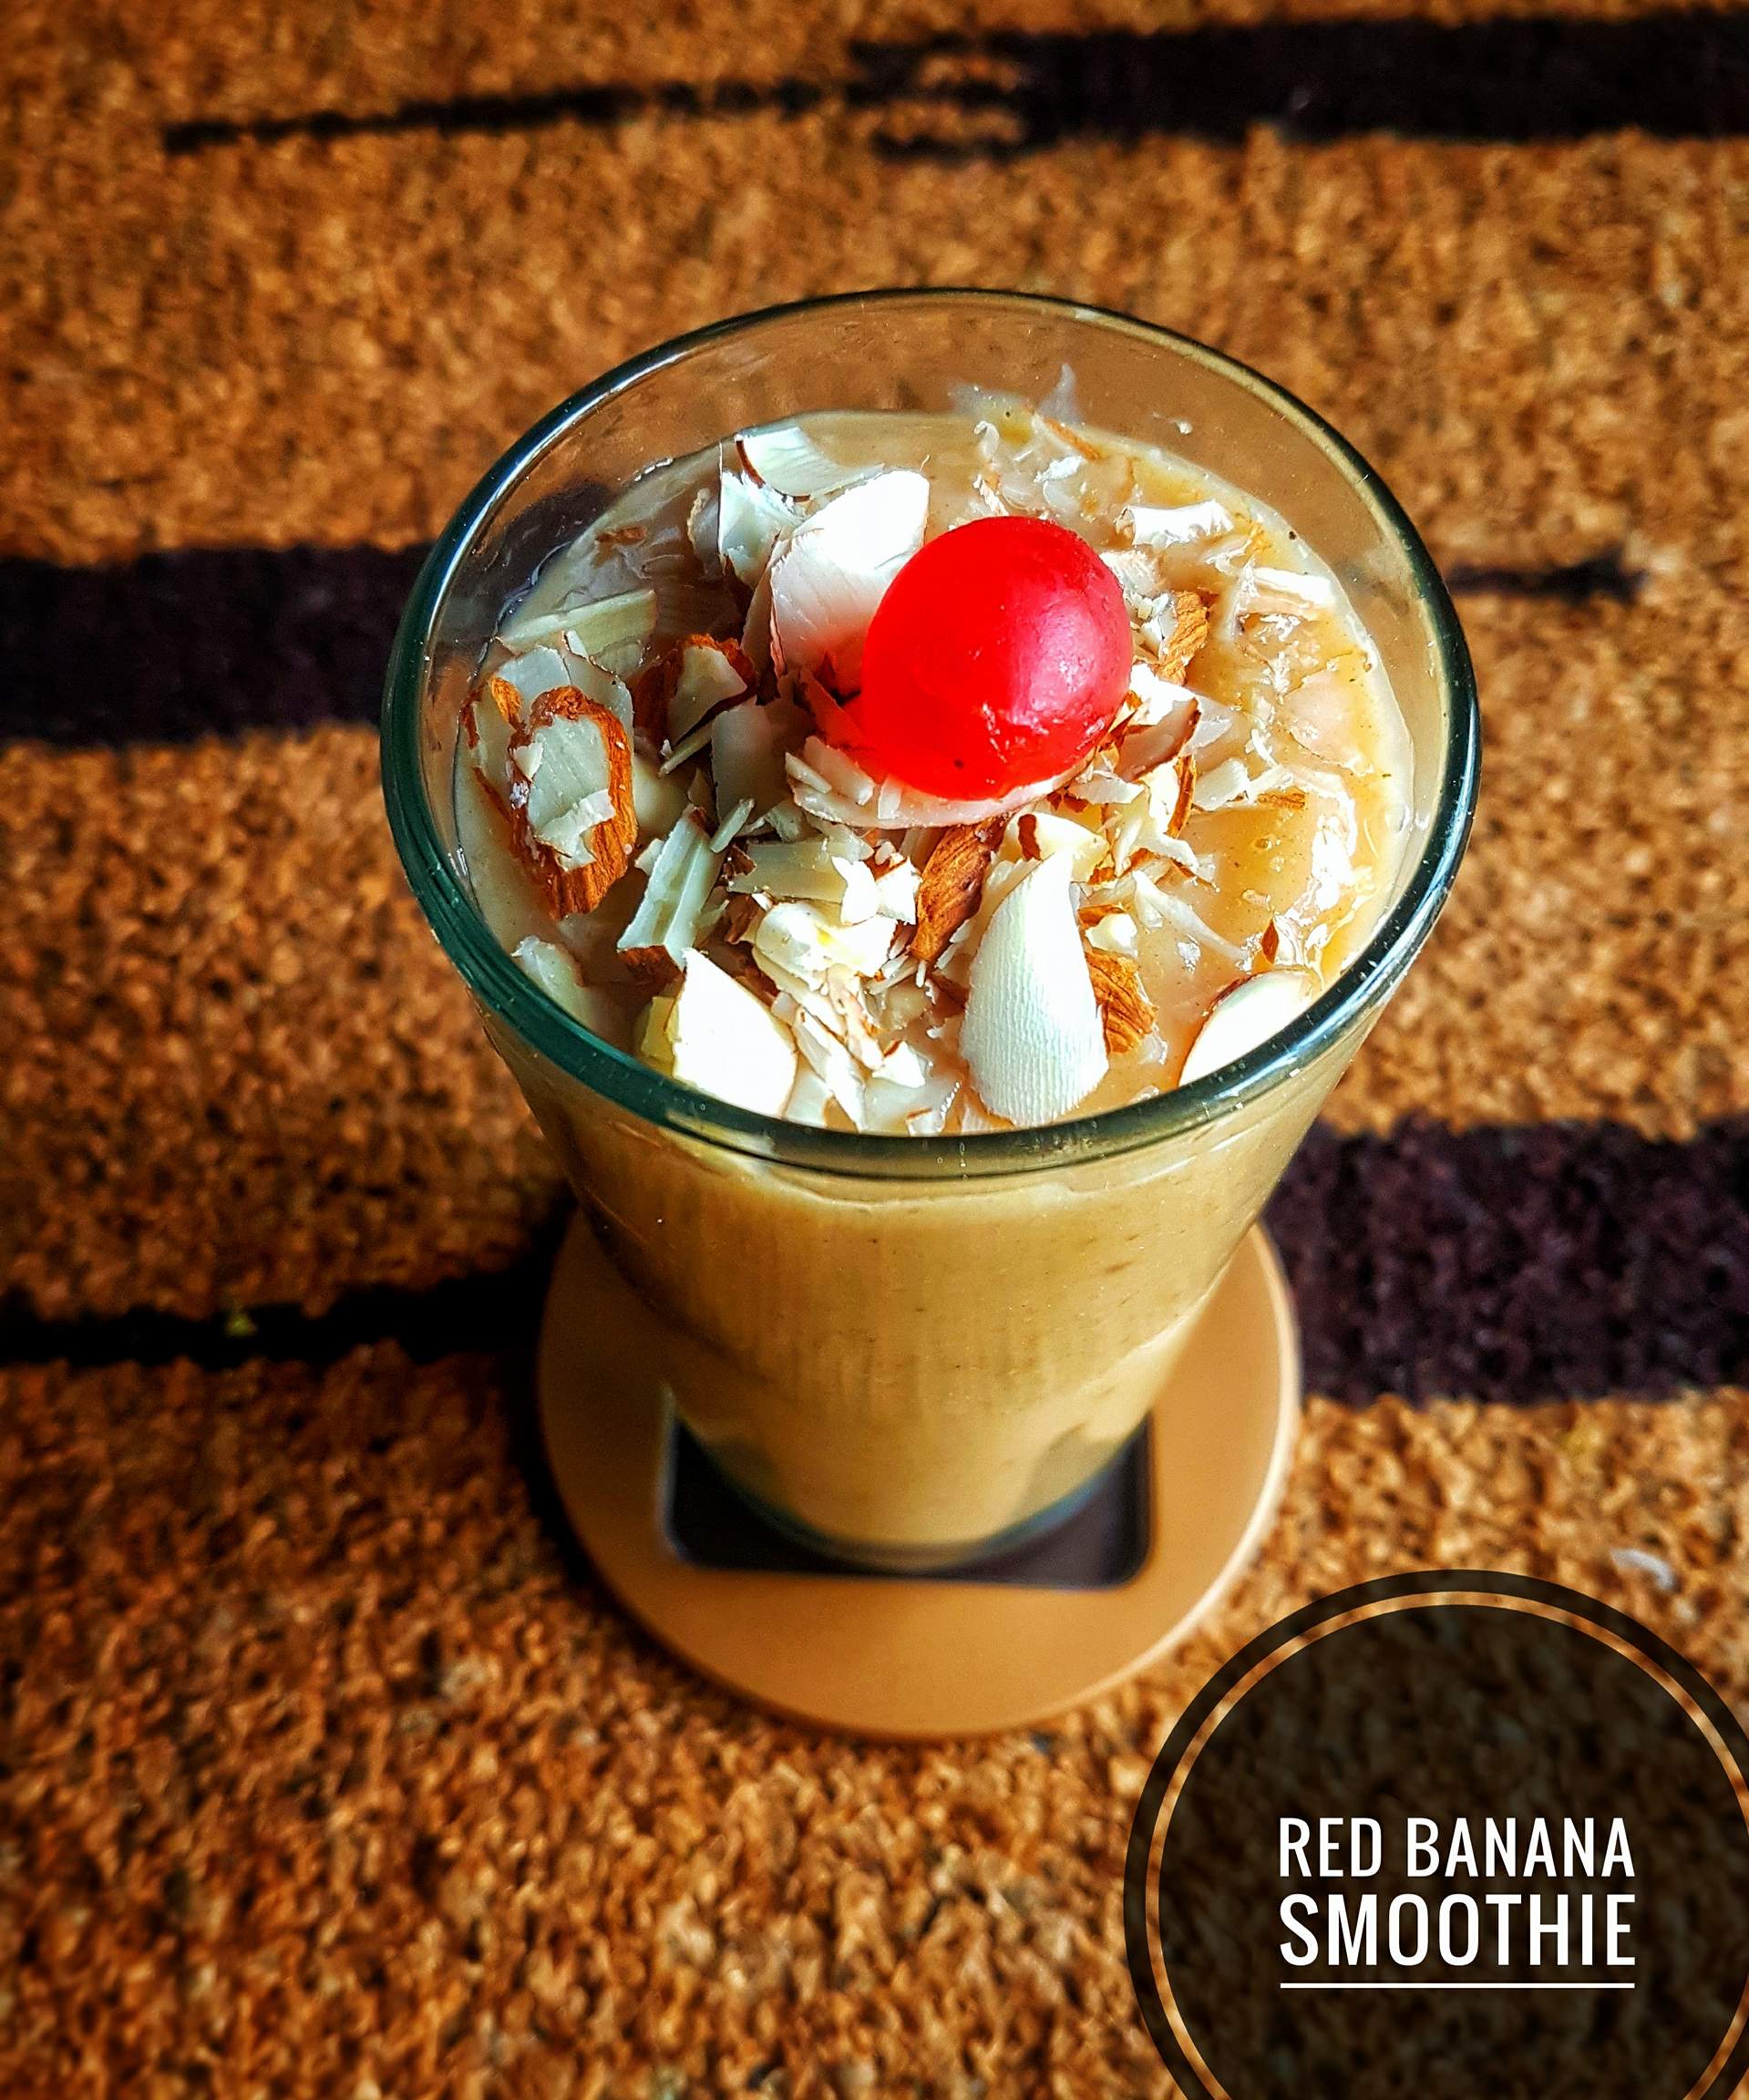 RED BANANA SMOOTHIE